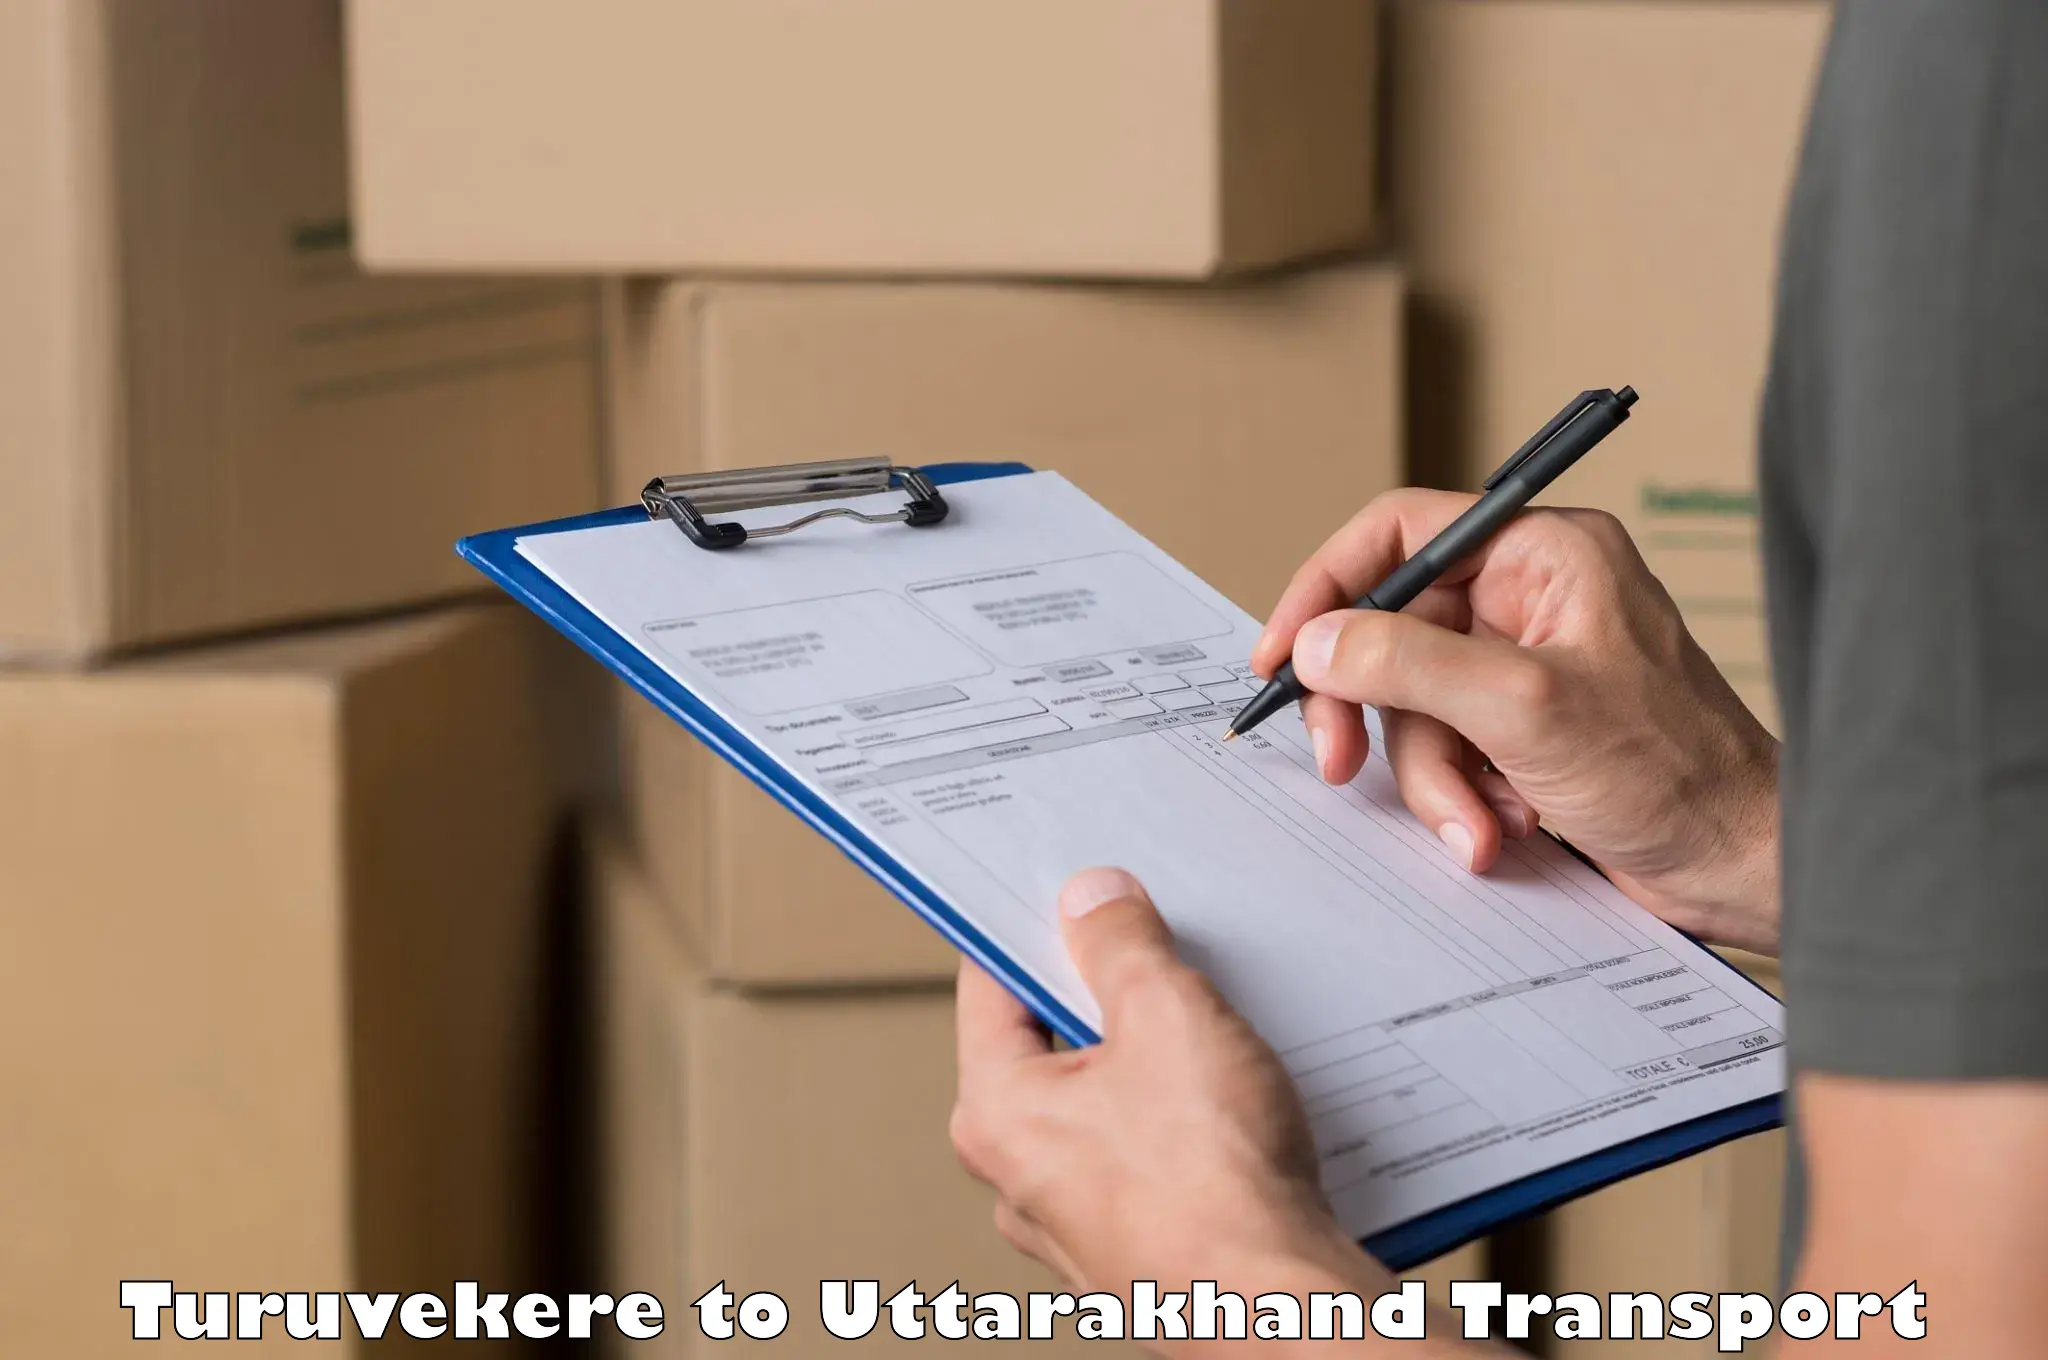 Bike shipping service Turuvekere to IIT Roorkee